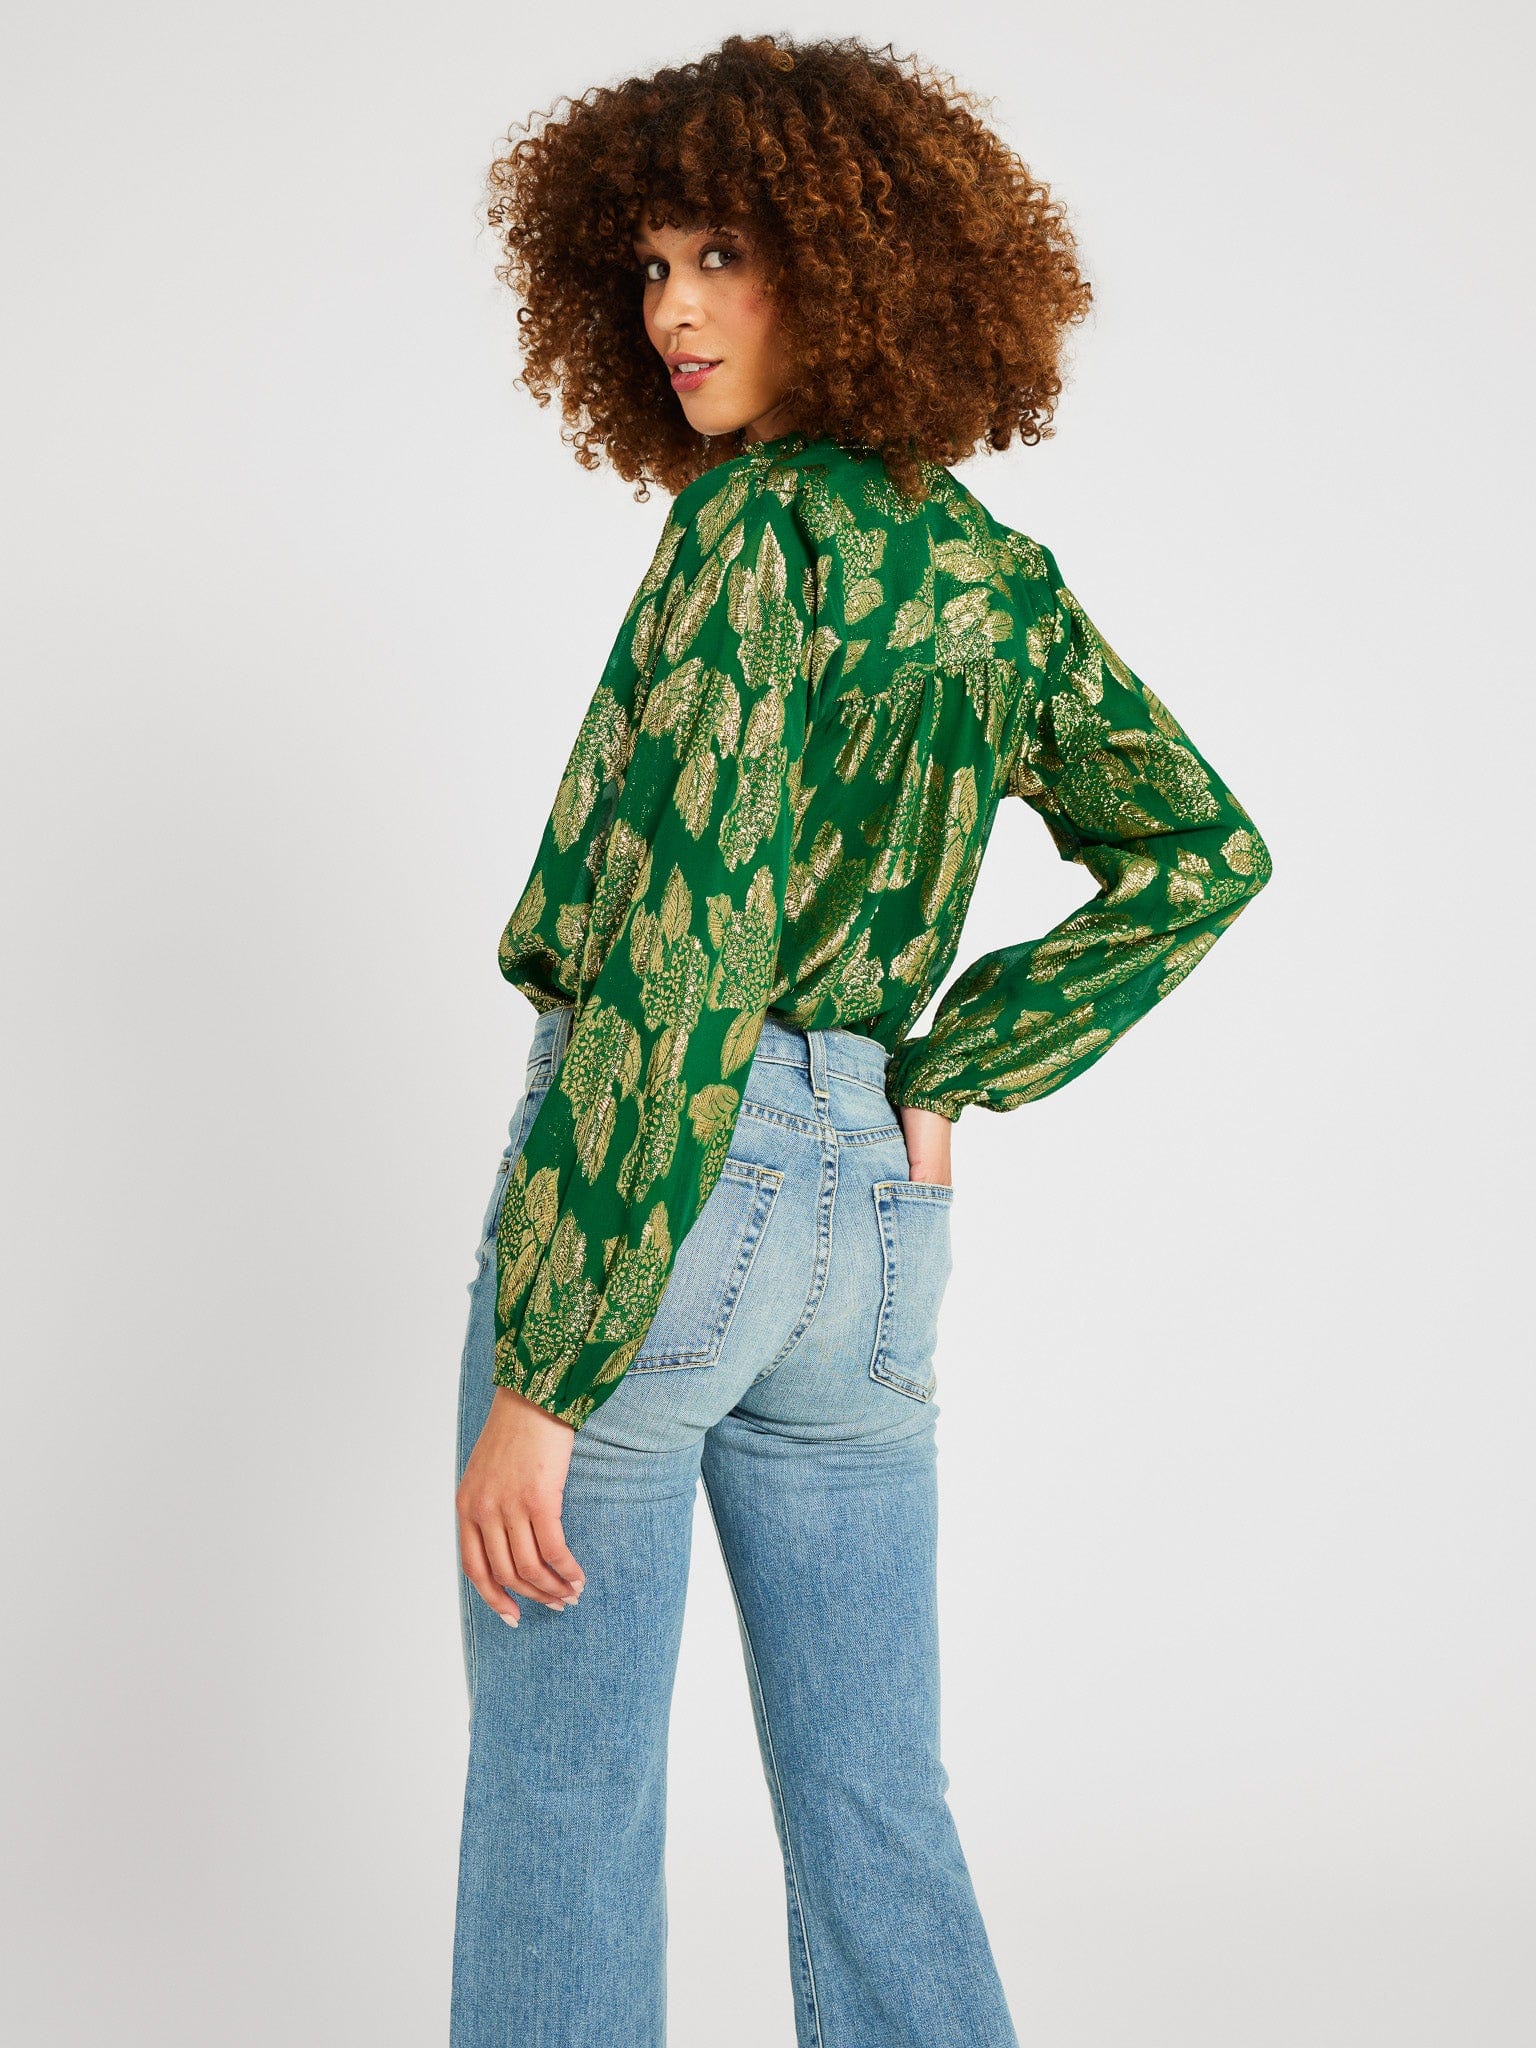 MILLE Clothing Francesca Top in Malachite Shimmer